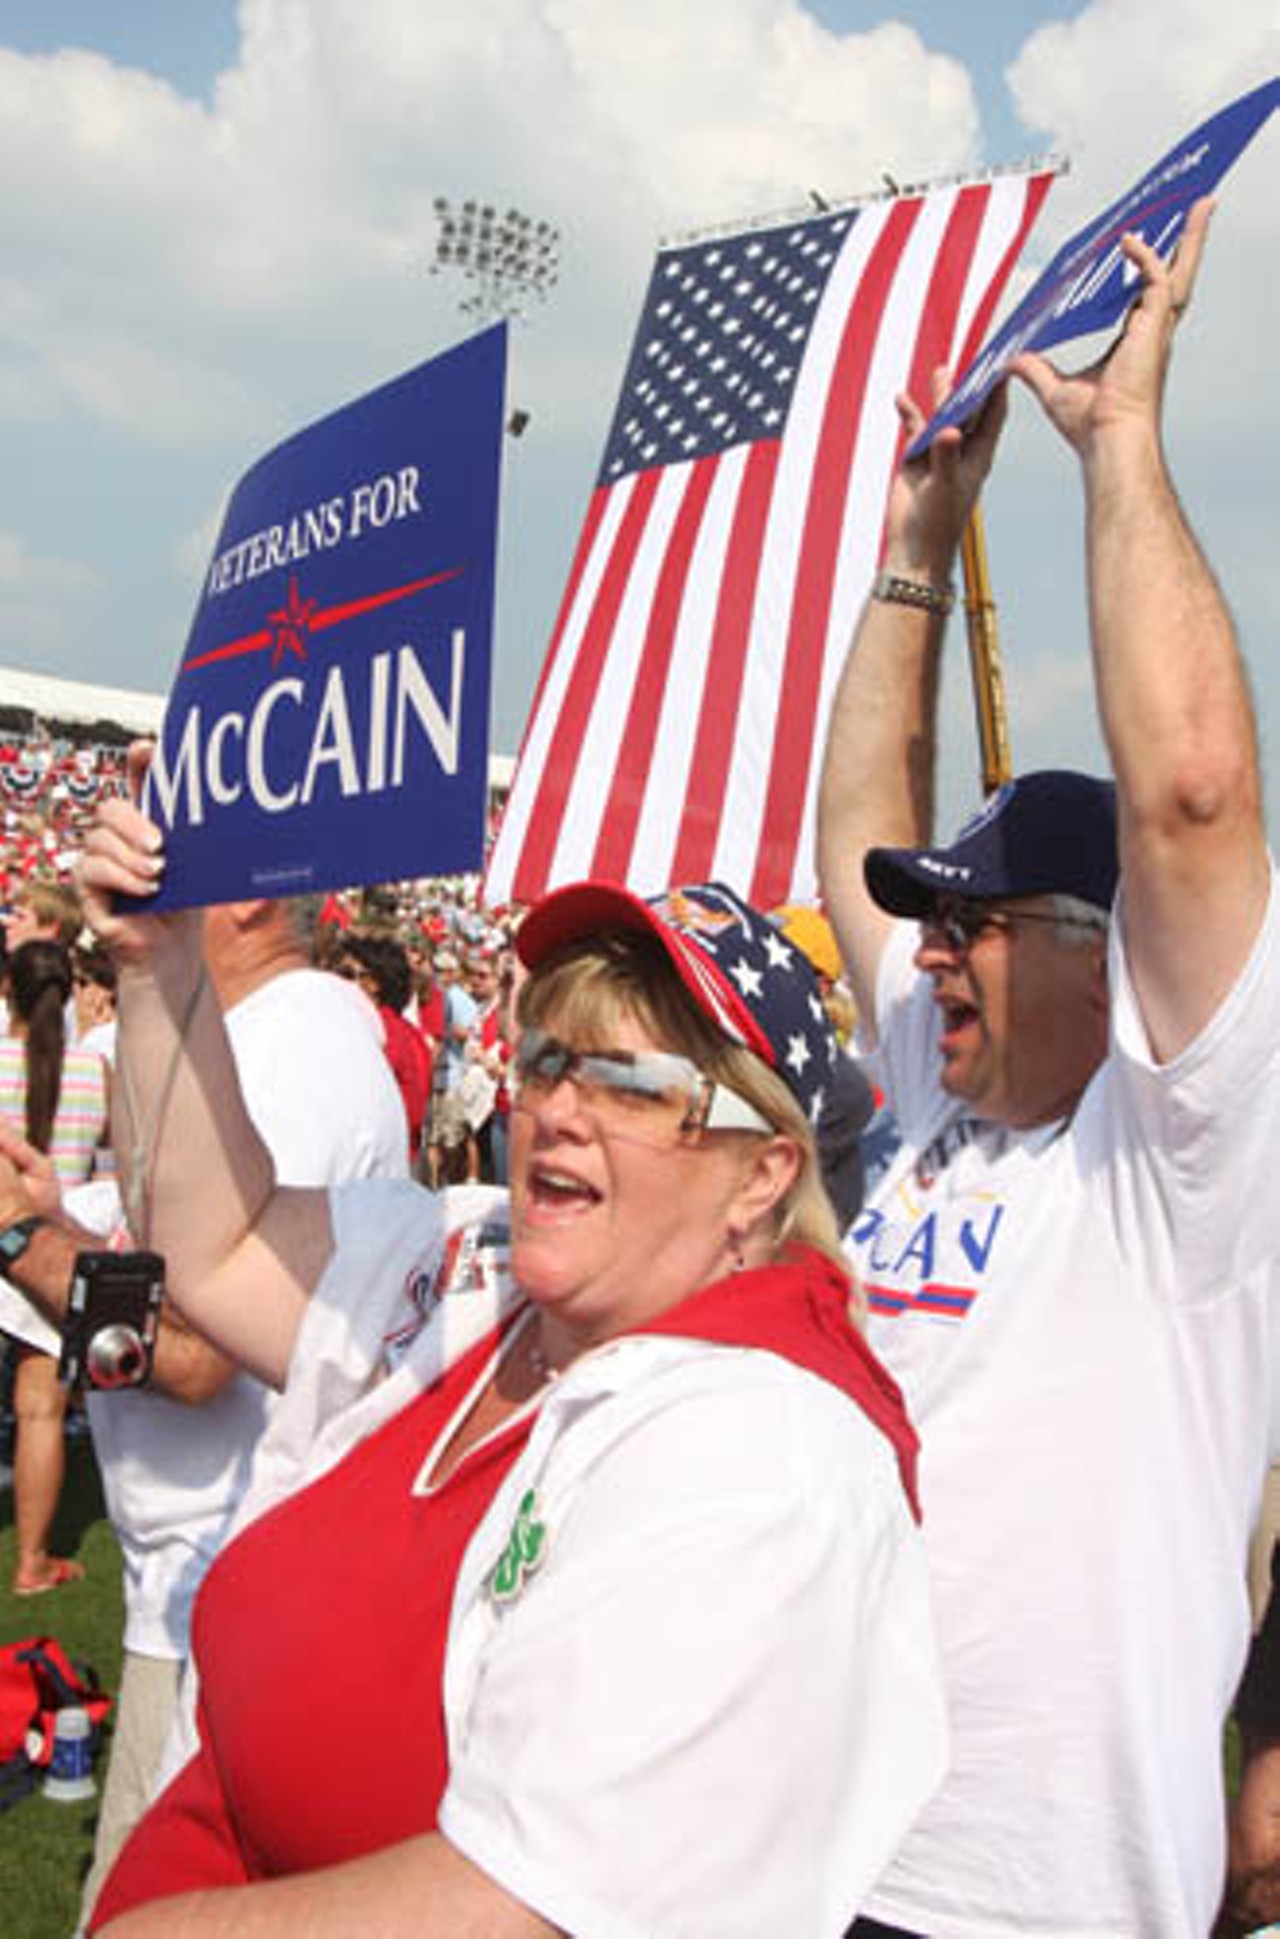 Mark and Mary Dempsey, Minooka, Illinois, show their support for John McCain.